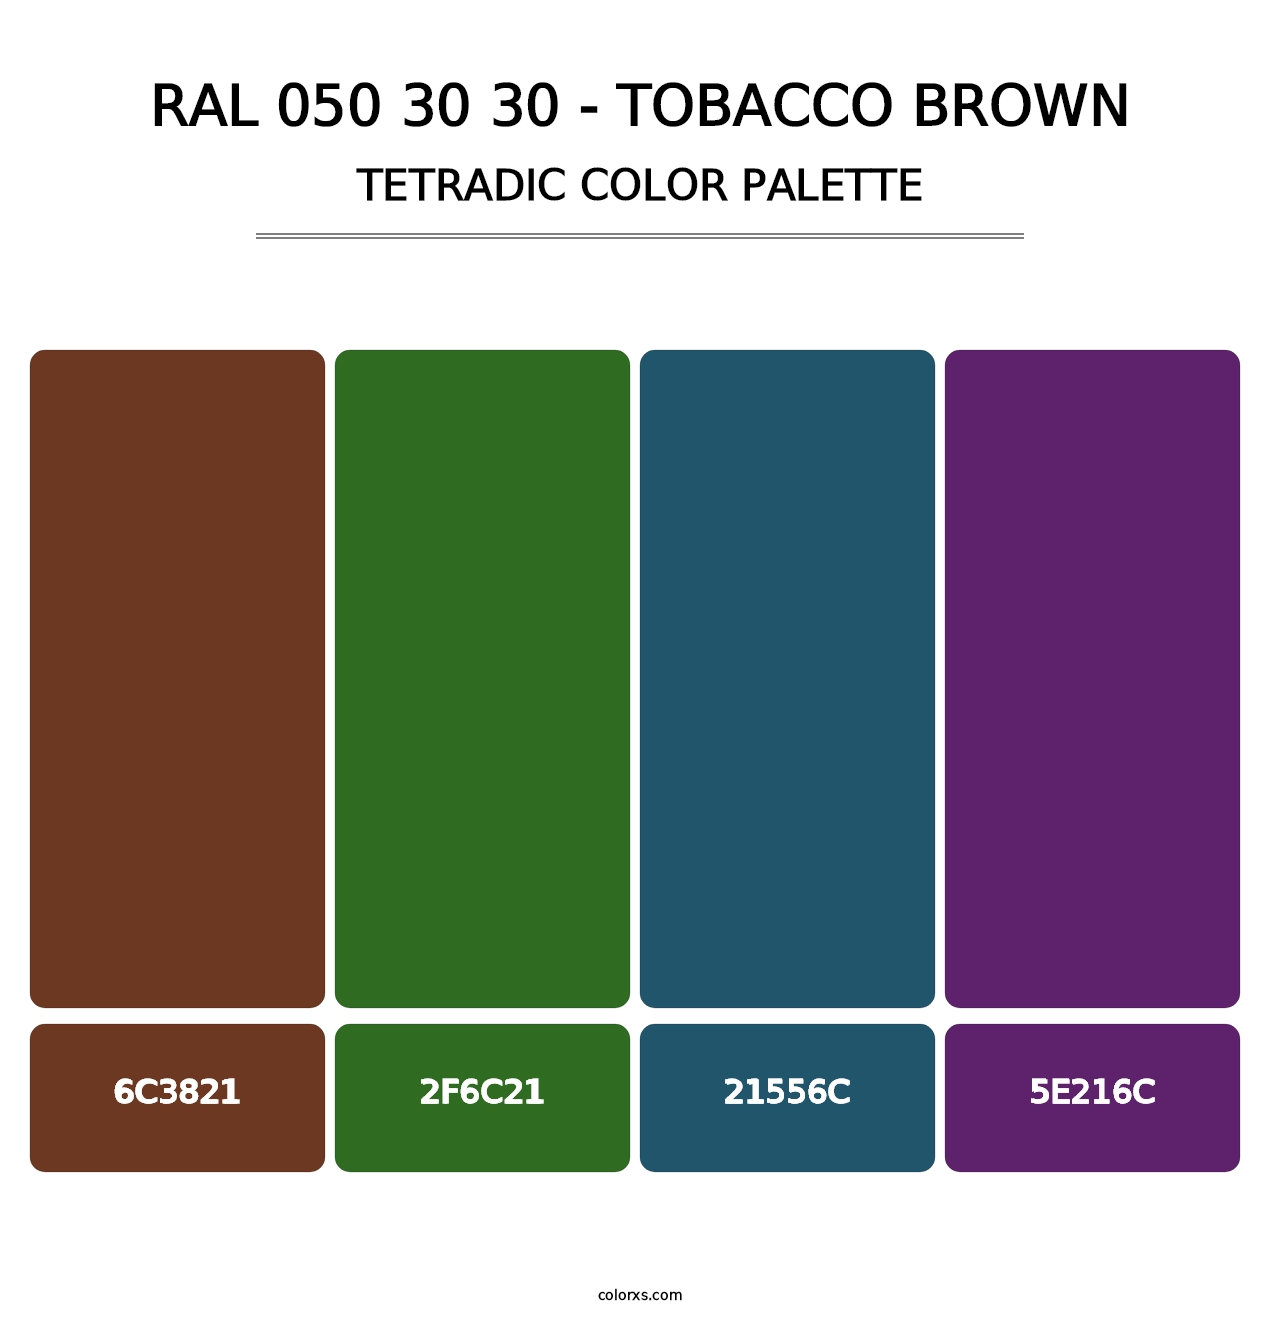 RAL 050 30 30 - Tobacco Brown - Tetradic Color Palette